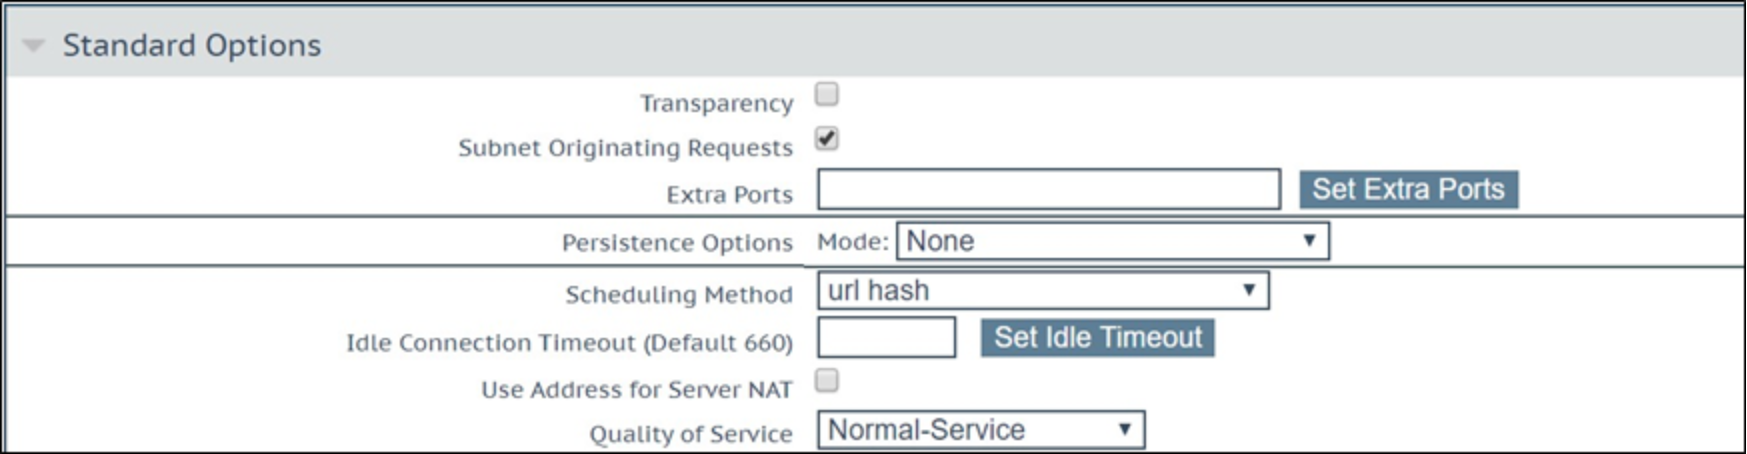 The standard options section of a virtual service shows a persistence option of none, and a scheduling method of url hash